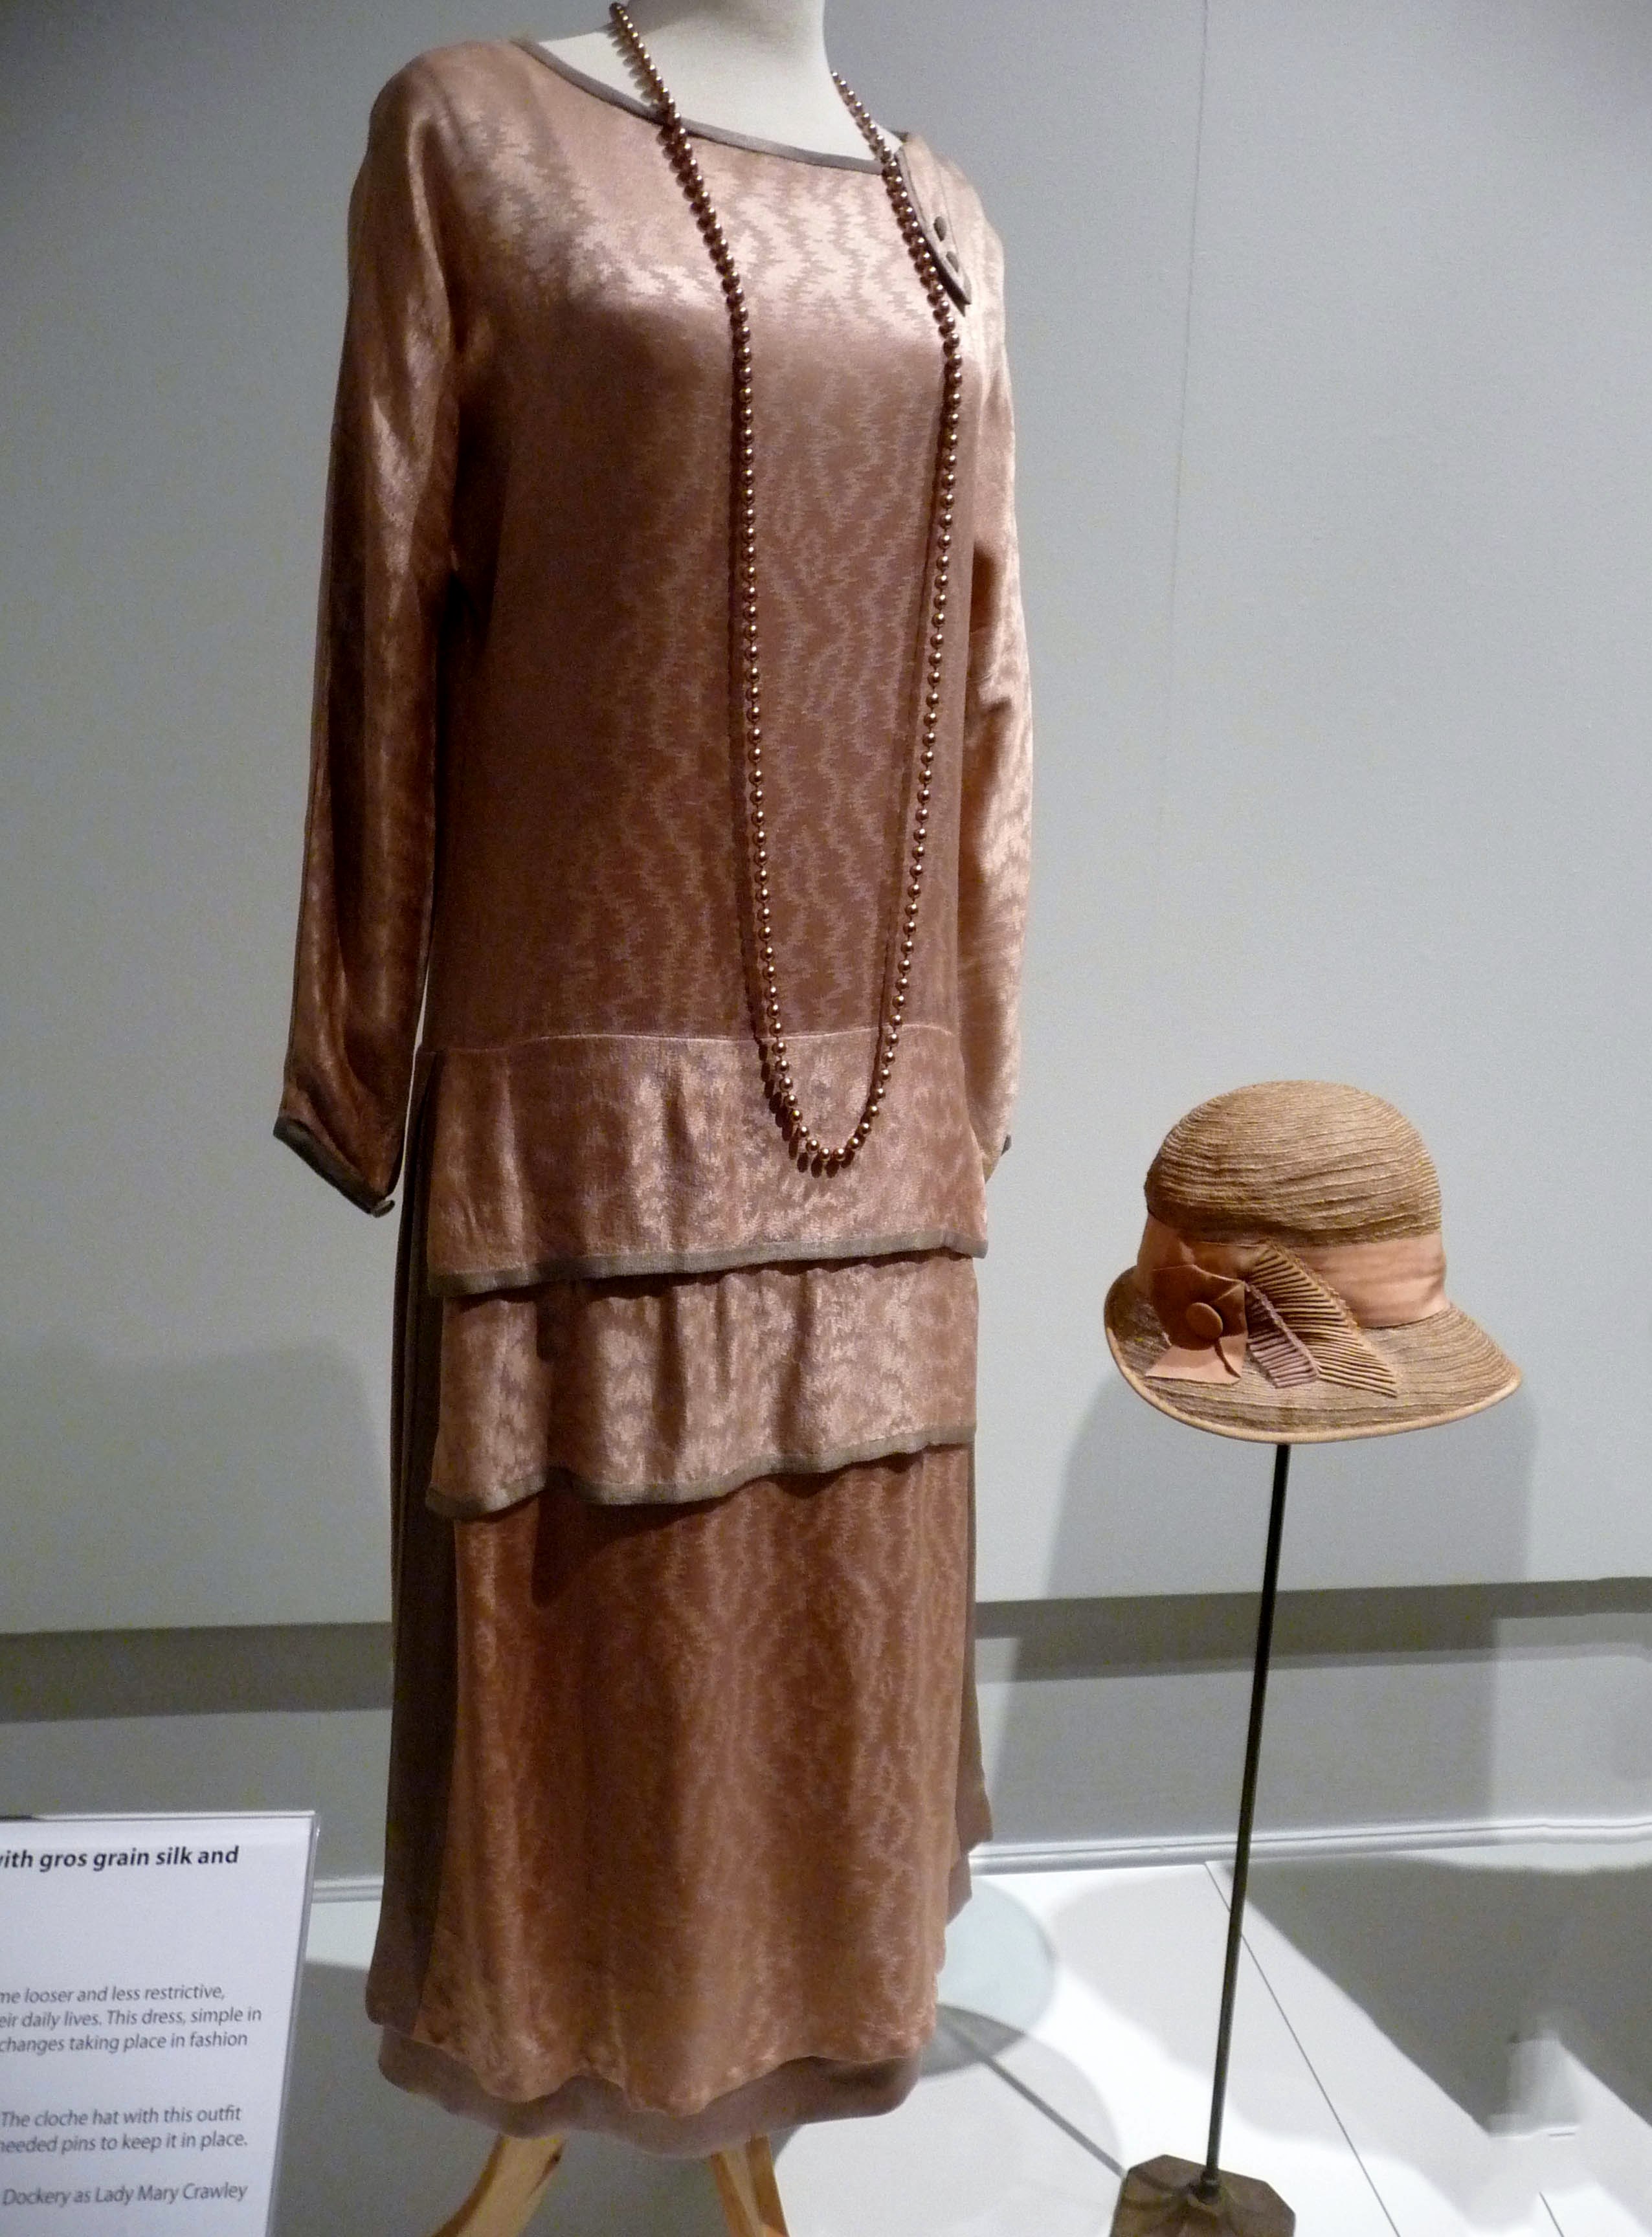 DAY DRESS, silk crepe. STRAW HAT with gros grain silk and petersham ribbon trim, made by Cosprop, 2011. Worn by Michelle Dockery as Lady Mary Crawley in Downton Abbey.